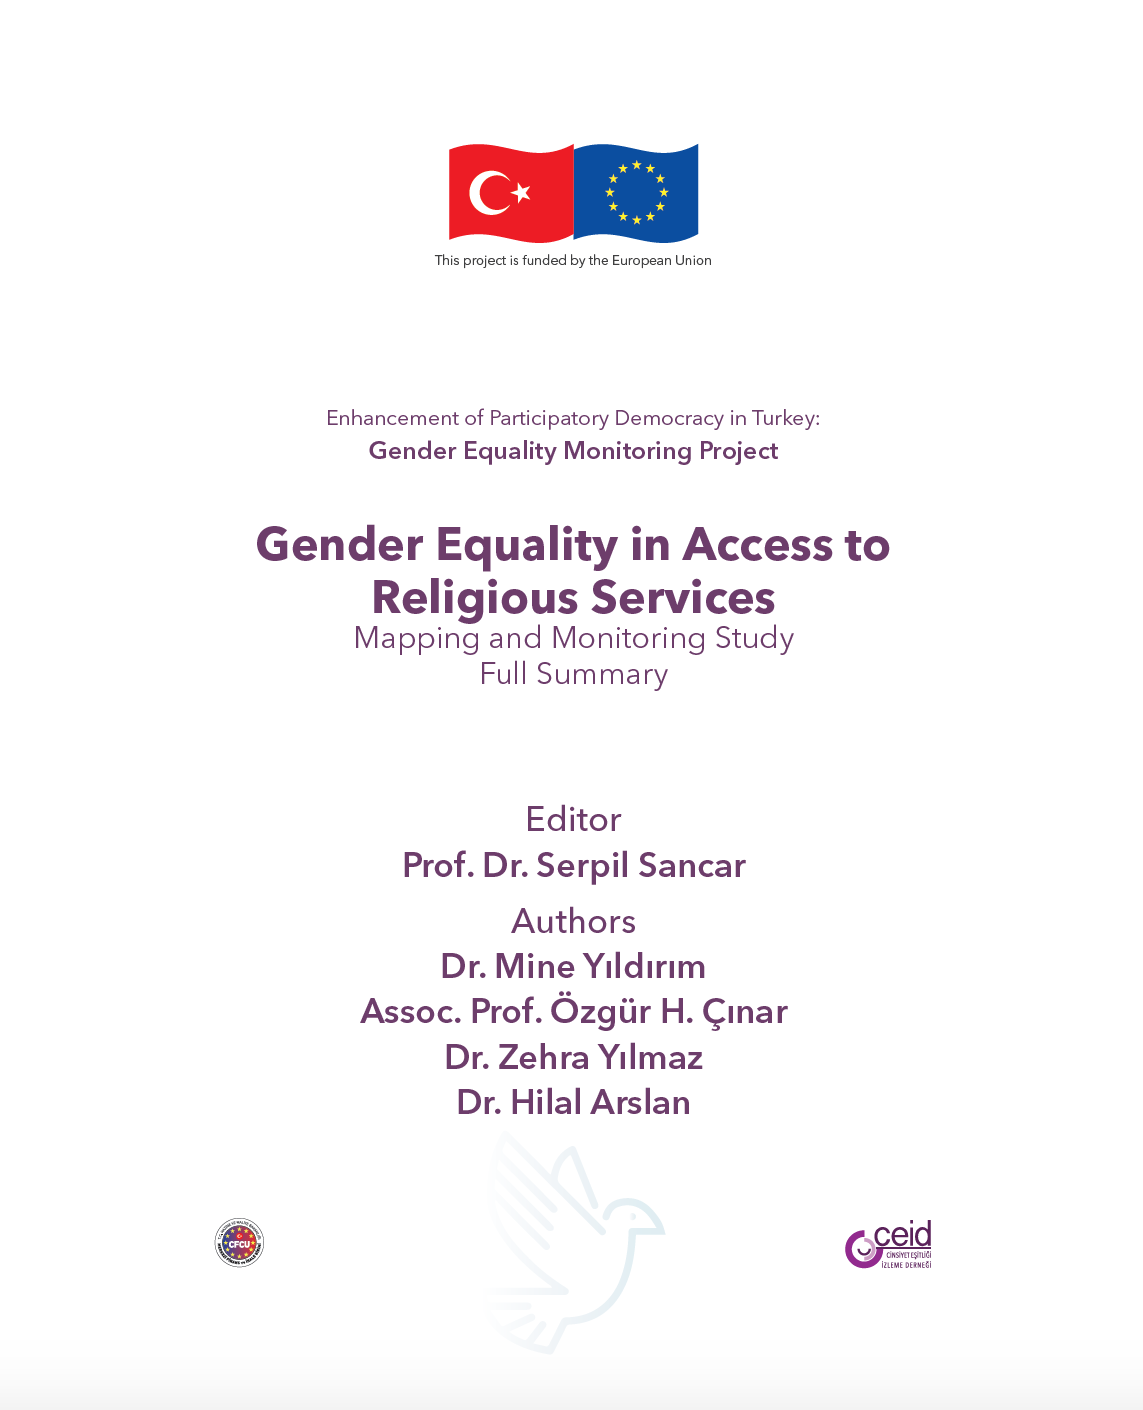 Gender Equality in Access to Religious Services